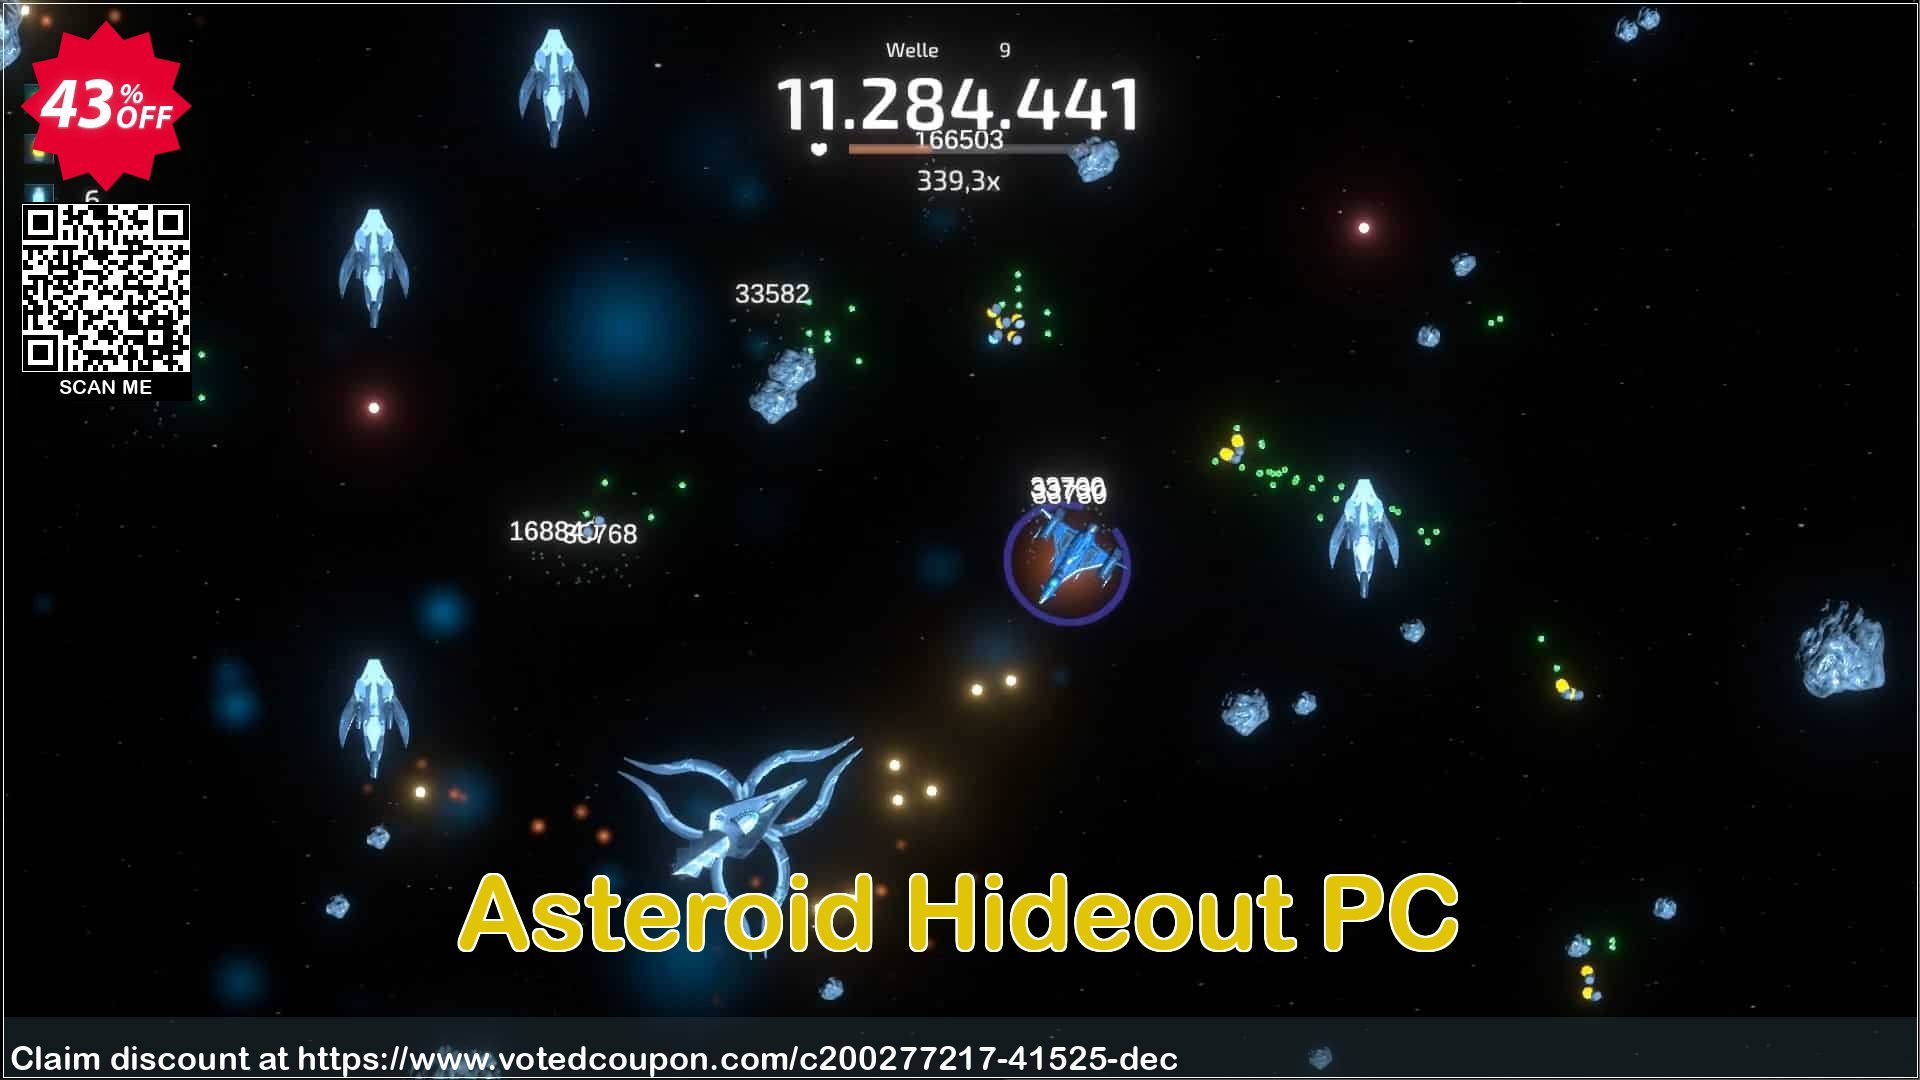 Asteroid Hideout PC Coupon Code May 2024, 43% OFF - VotedCoupon